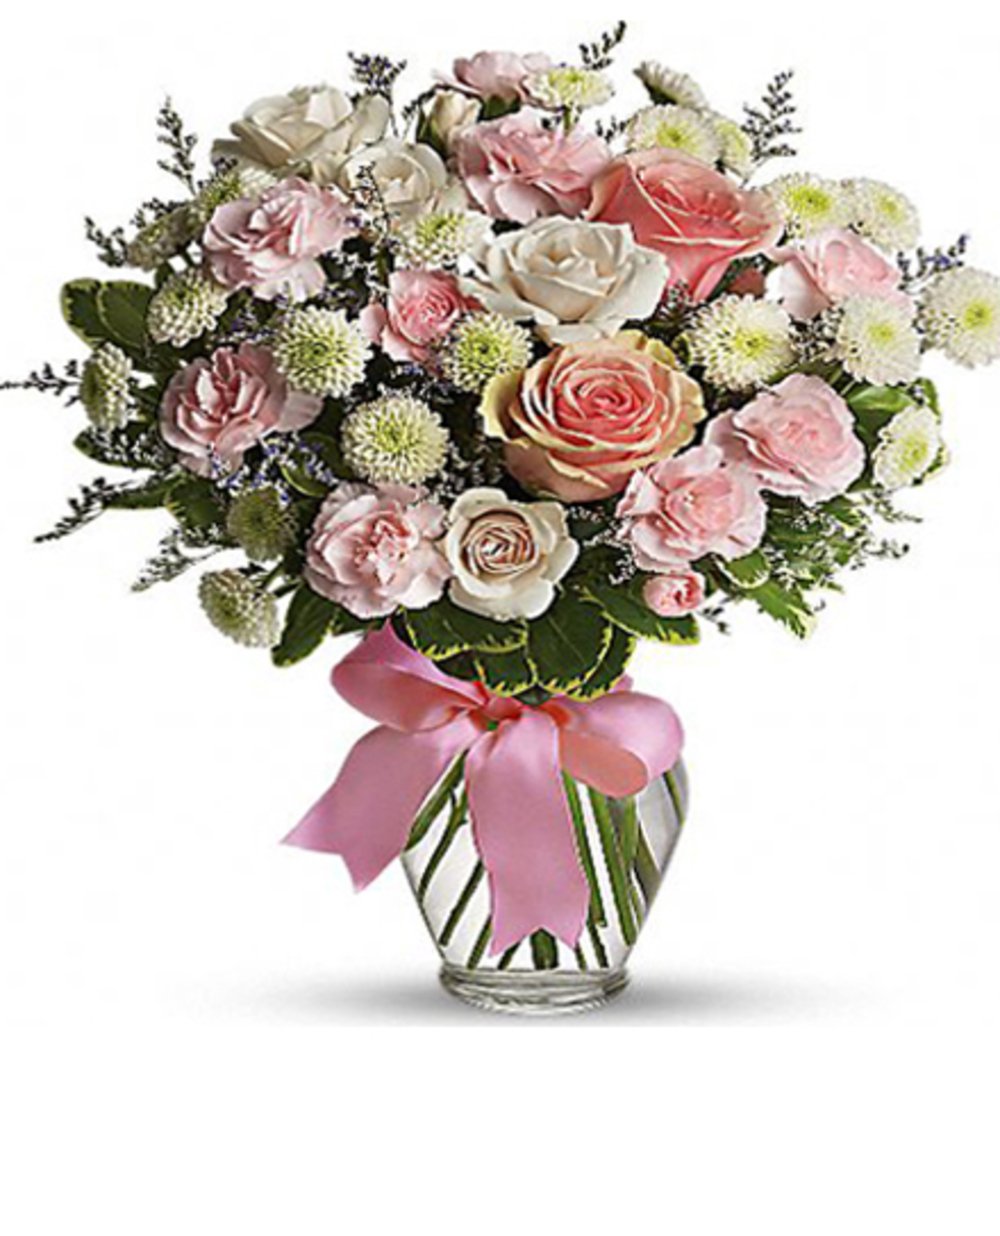 Vase with Mixed Pink & White Roses , Carnations & Crysanthimums